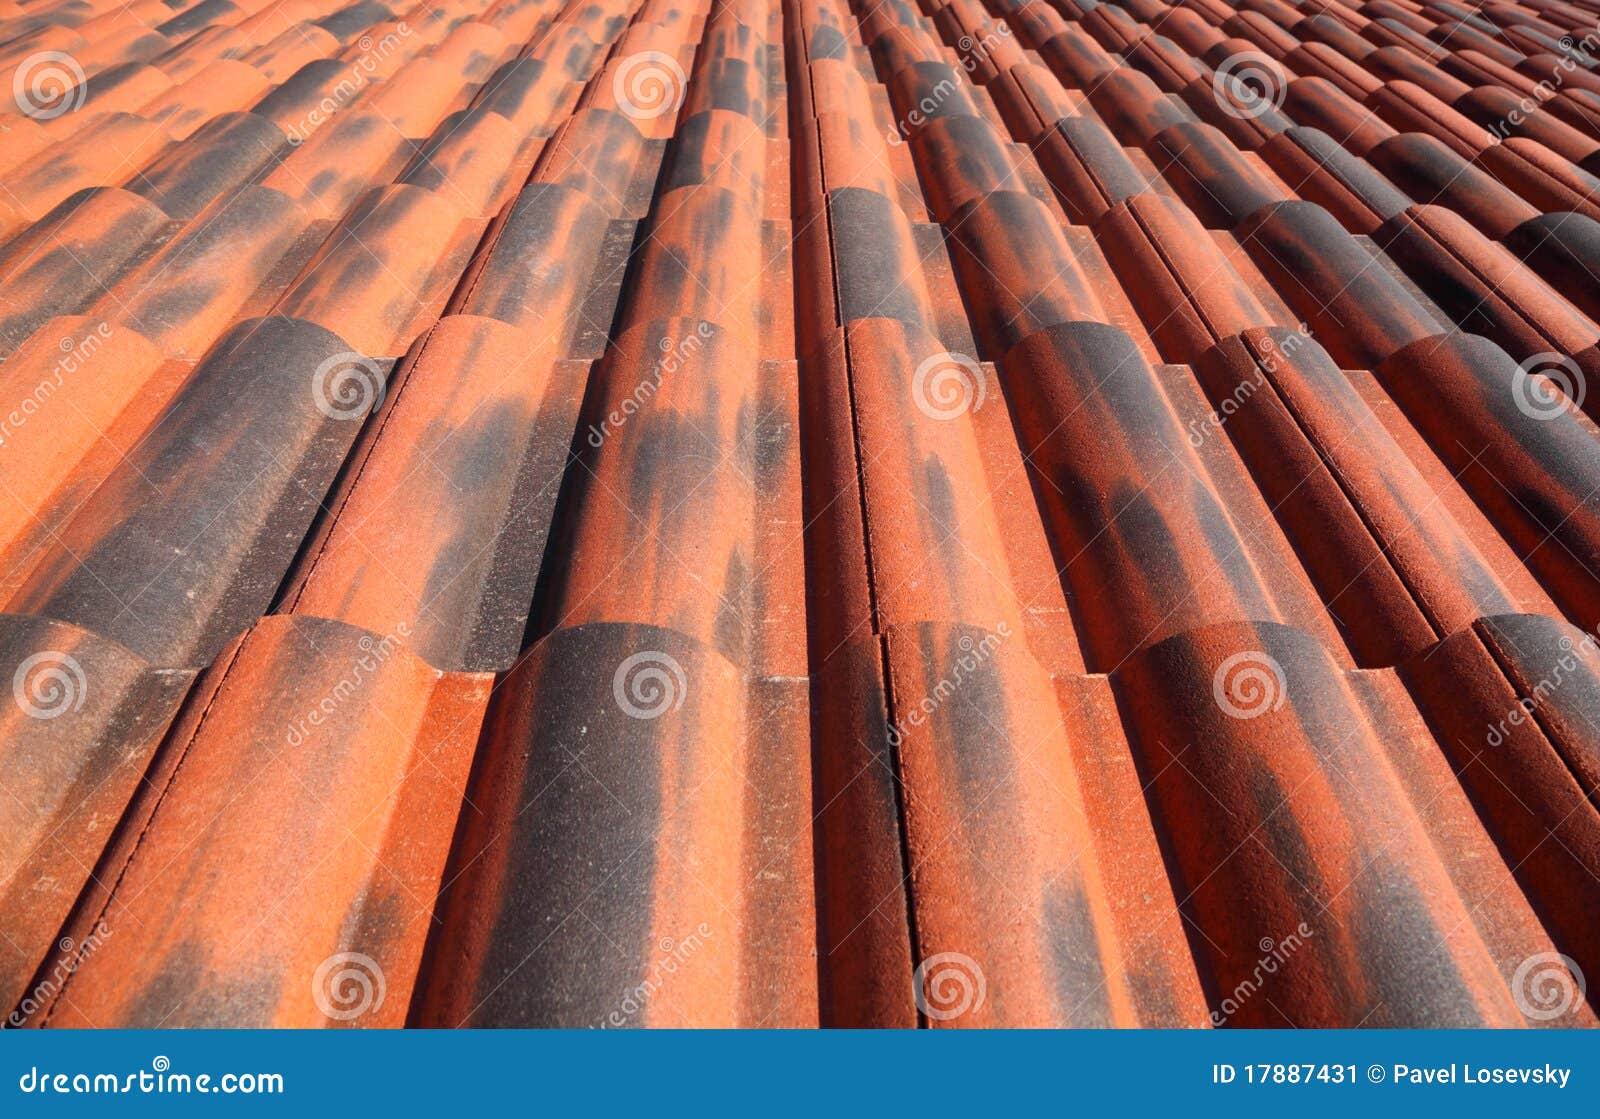 Old terracotta tile roof stock image. Image of metal - 17887431